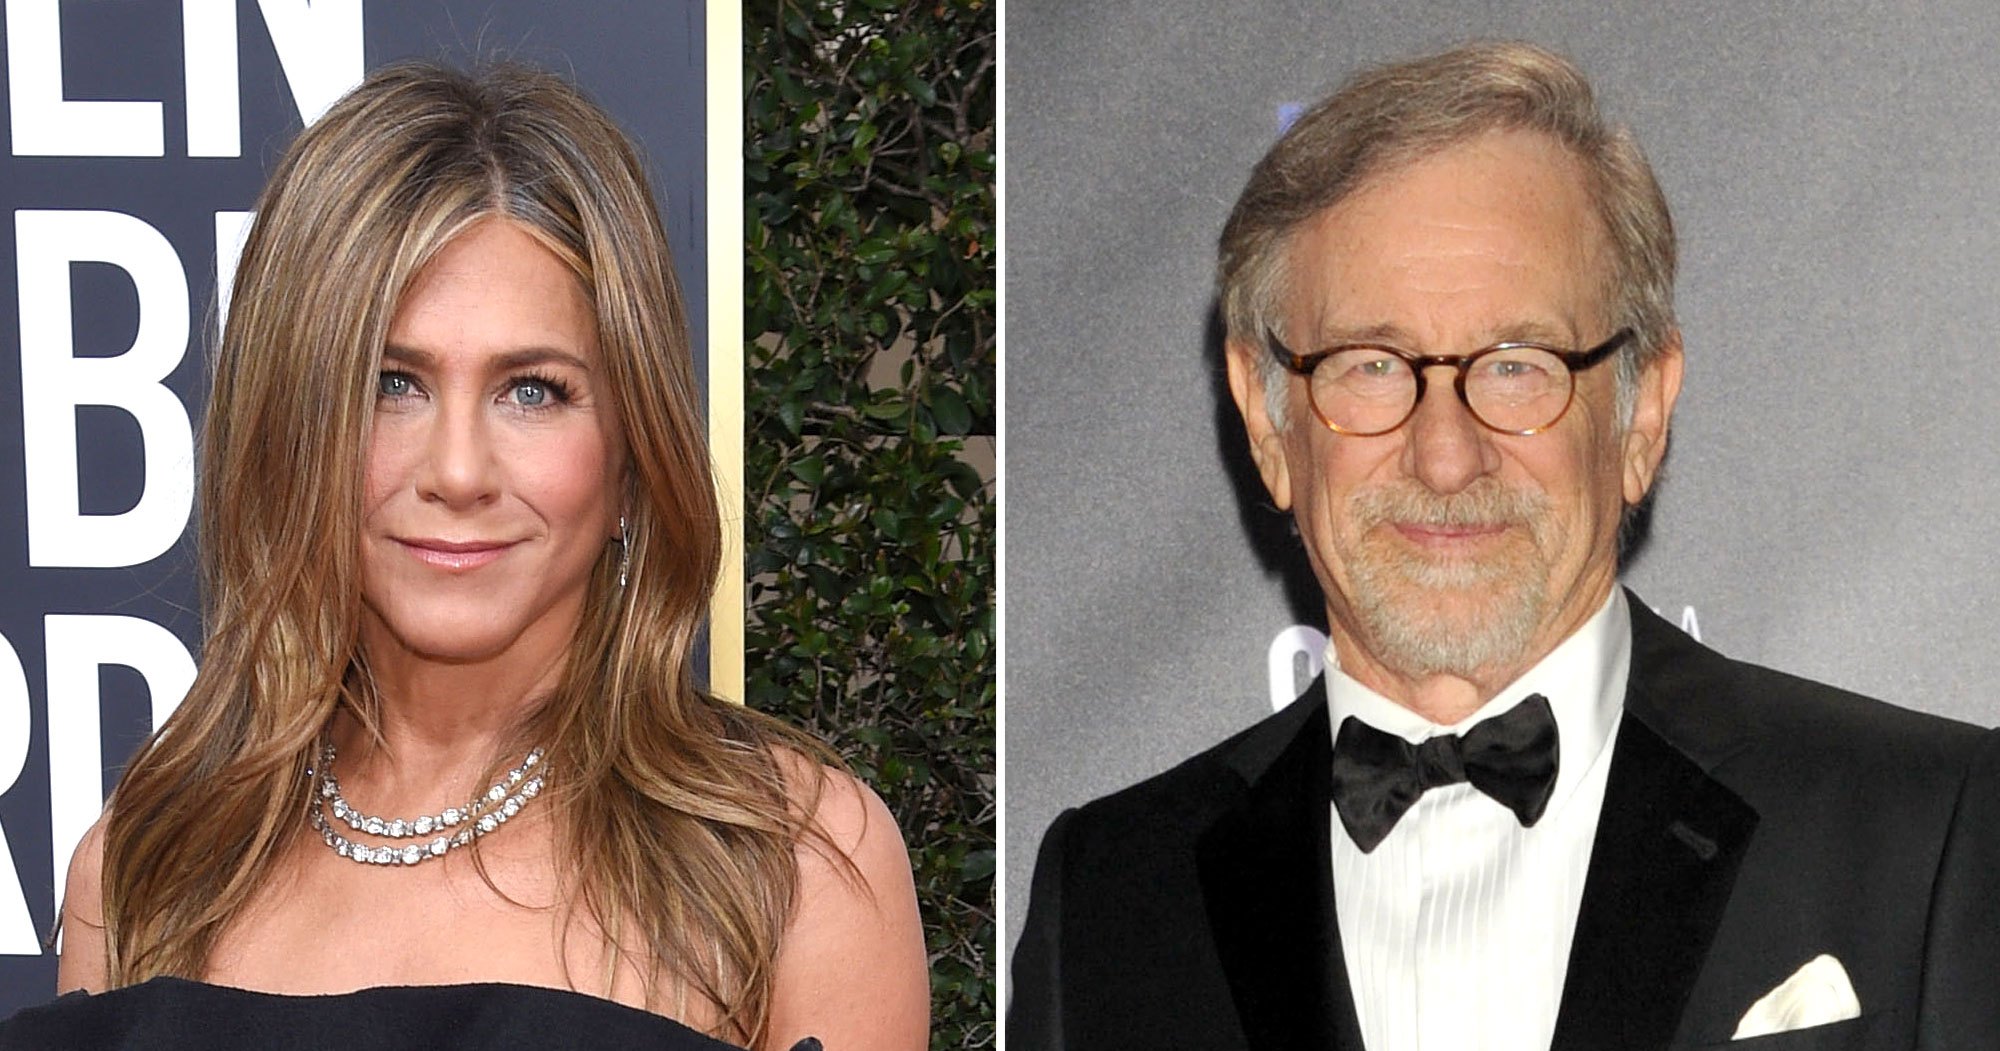 Jennifer Aniston, Steven Spielberg and More Celebs Who Are Godparents